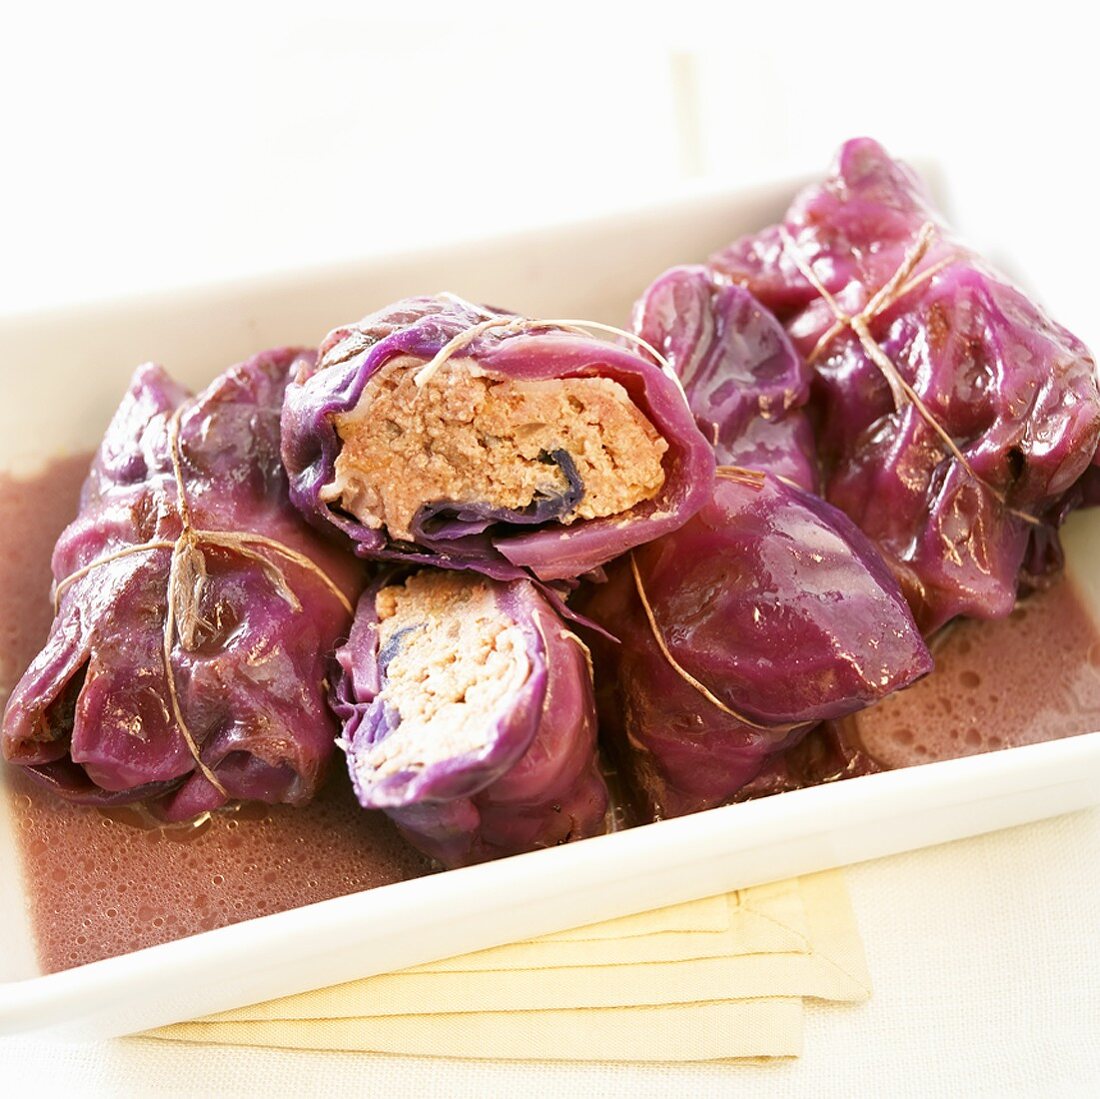 Stuffed red cabbage leaves